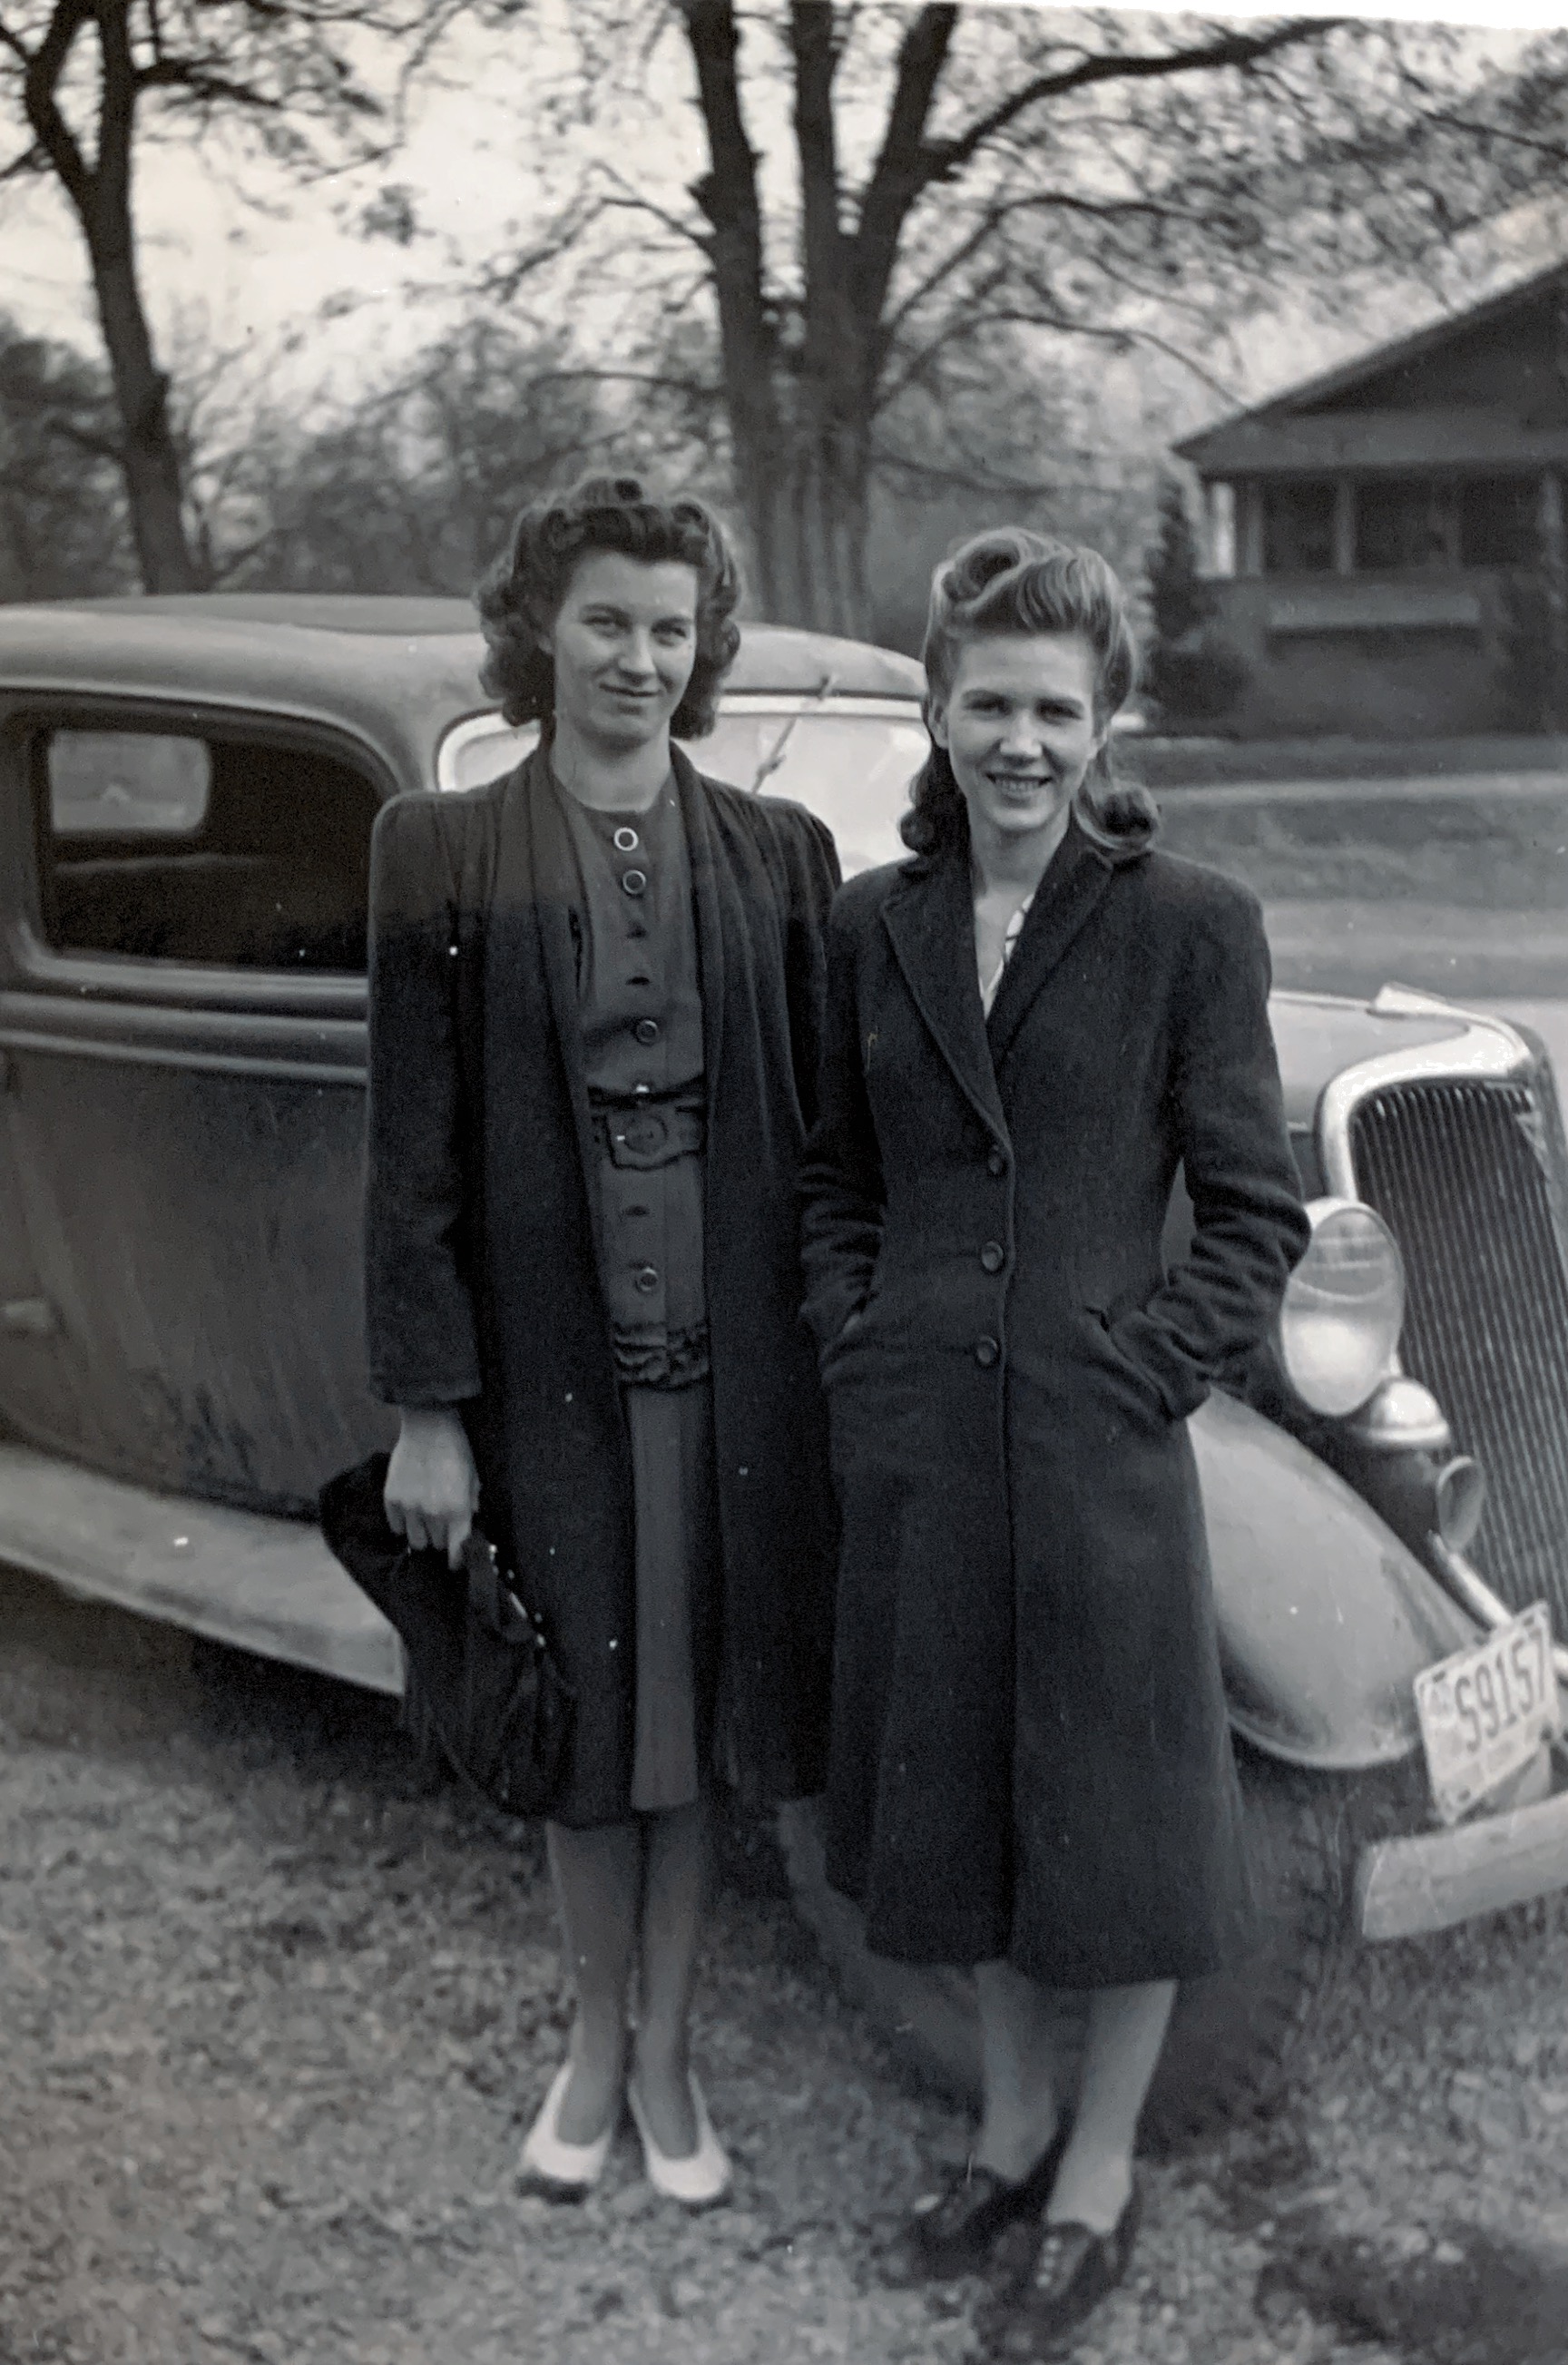 Leora with girlfriend Dorothy Moore.  Info from Corey: Sent this to the car guru on Twitter to see what kind of car it was. Looks like it's the same car as Bonnie and Clyde's death car.  .------‐--‐---------- A couple more stylish cuties with a Ford, this one a 1934 Model 40 Tudor. The gals' fashions and hair suggest the photo was circa 1940 or so.